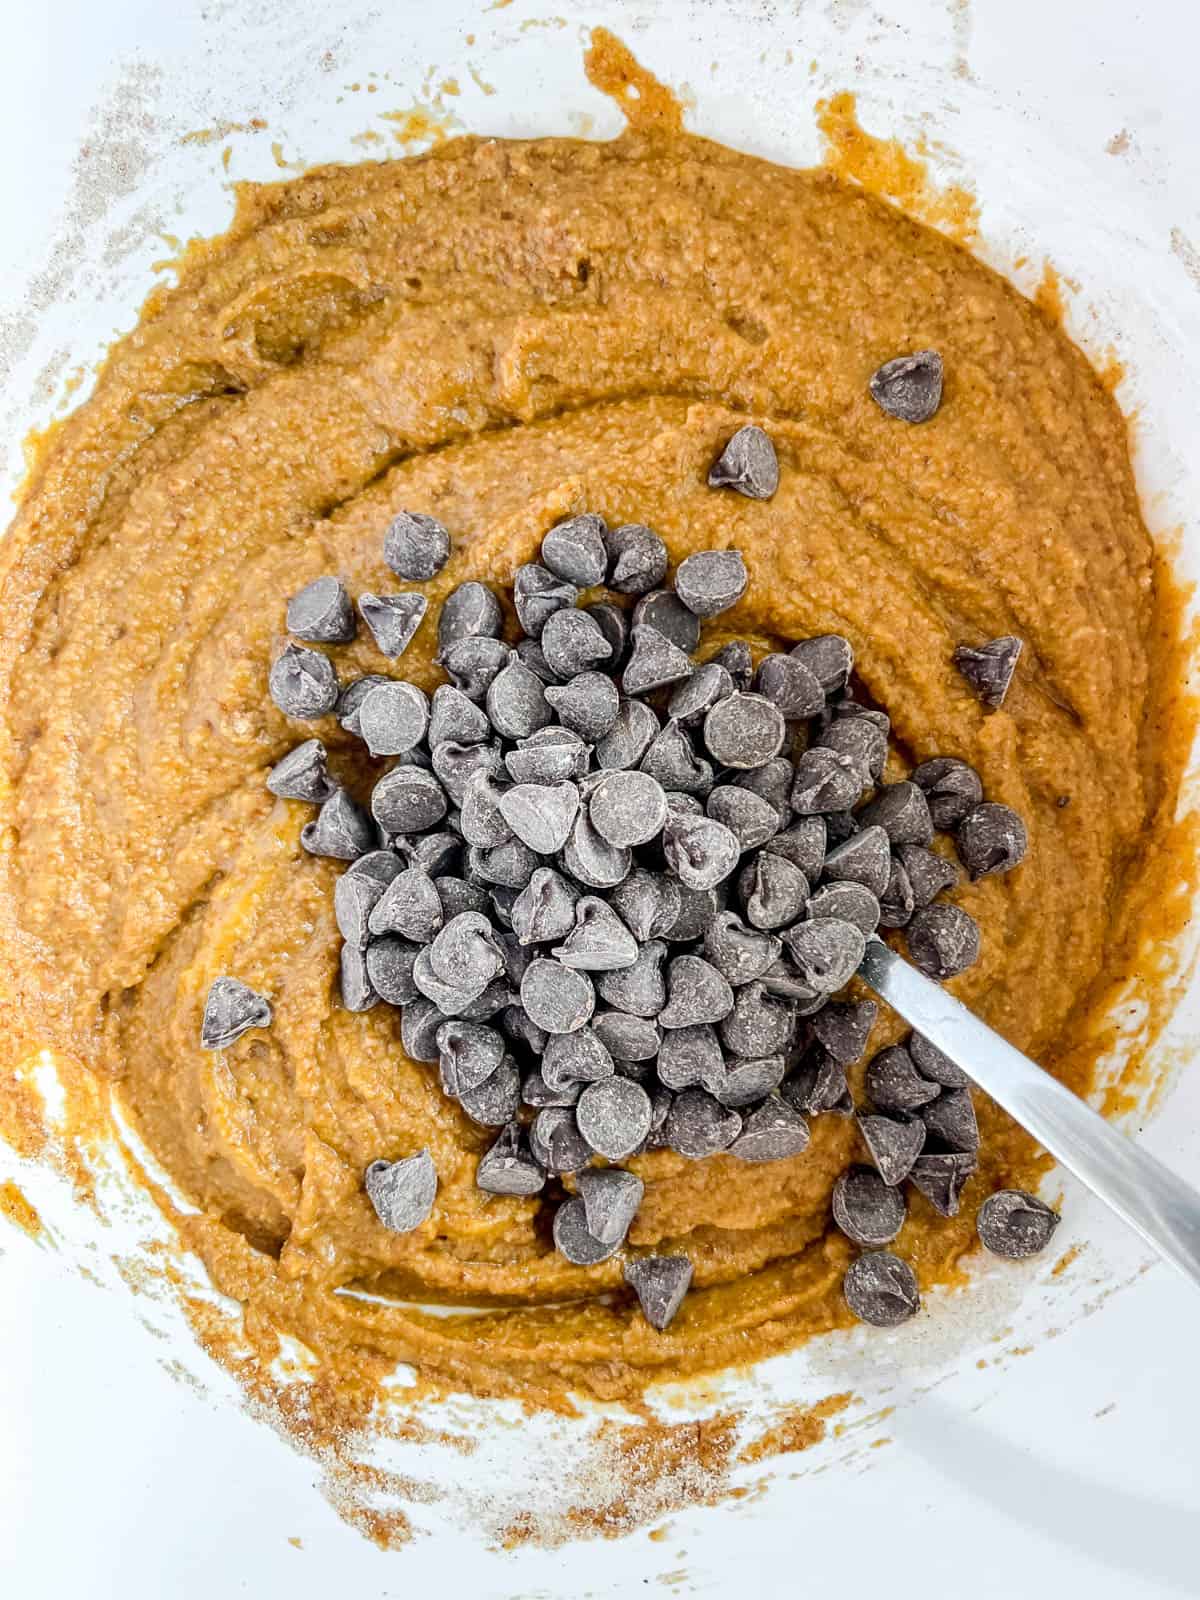 Chocolate chips added to paleo pumpkin chocolate chip muffins batter.